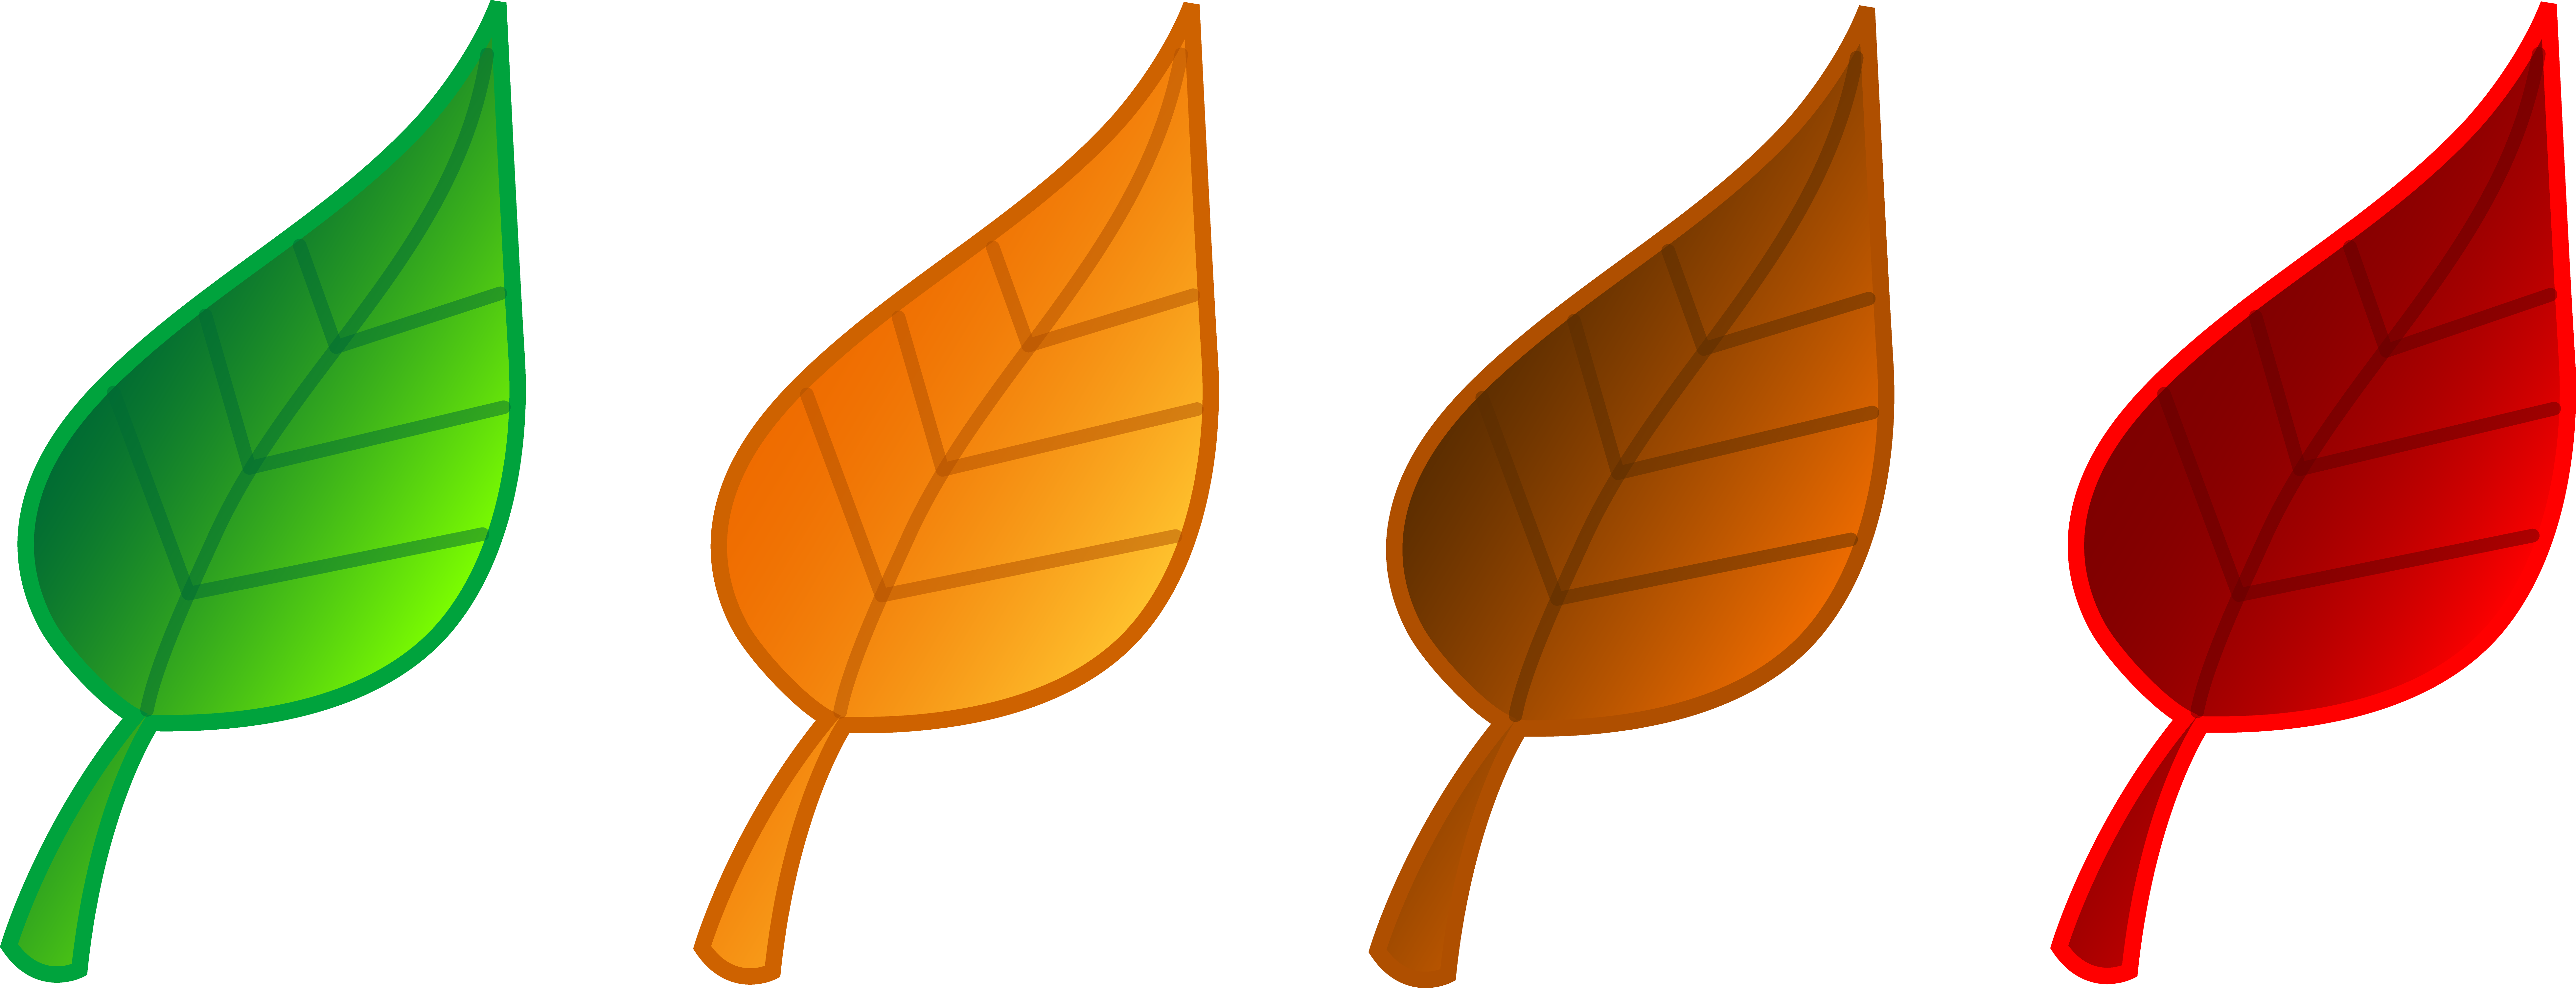 Yellow Leaves Clip Art | Clipart library - Free Clipart Images